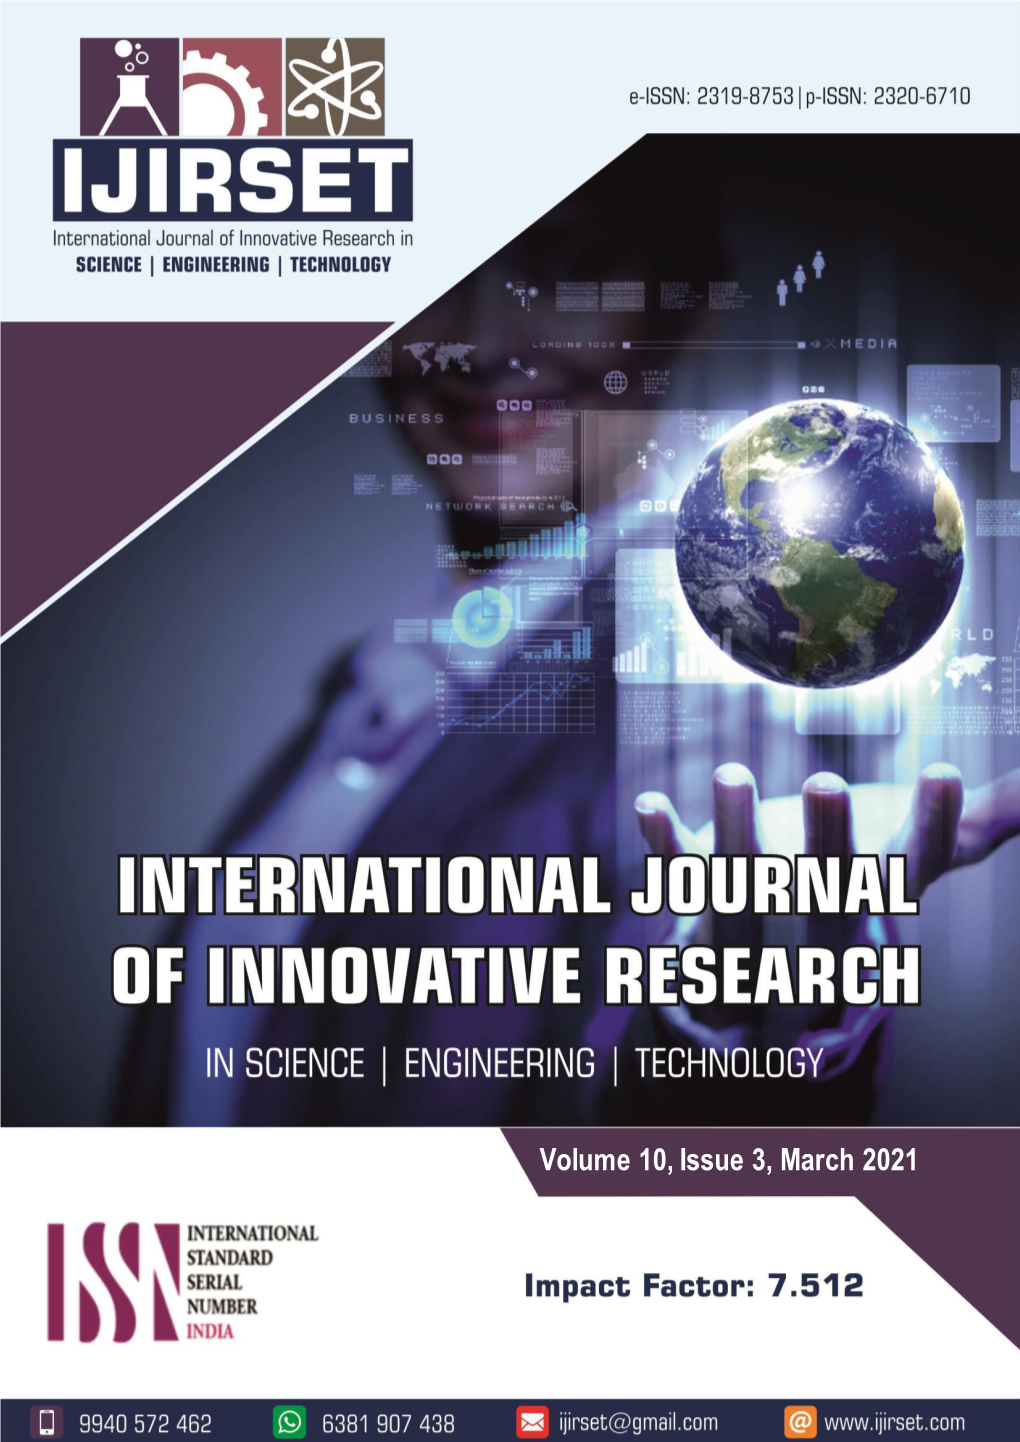 Volume 10, Issue 3, March 2021